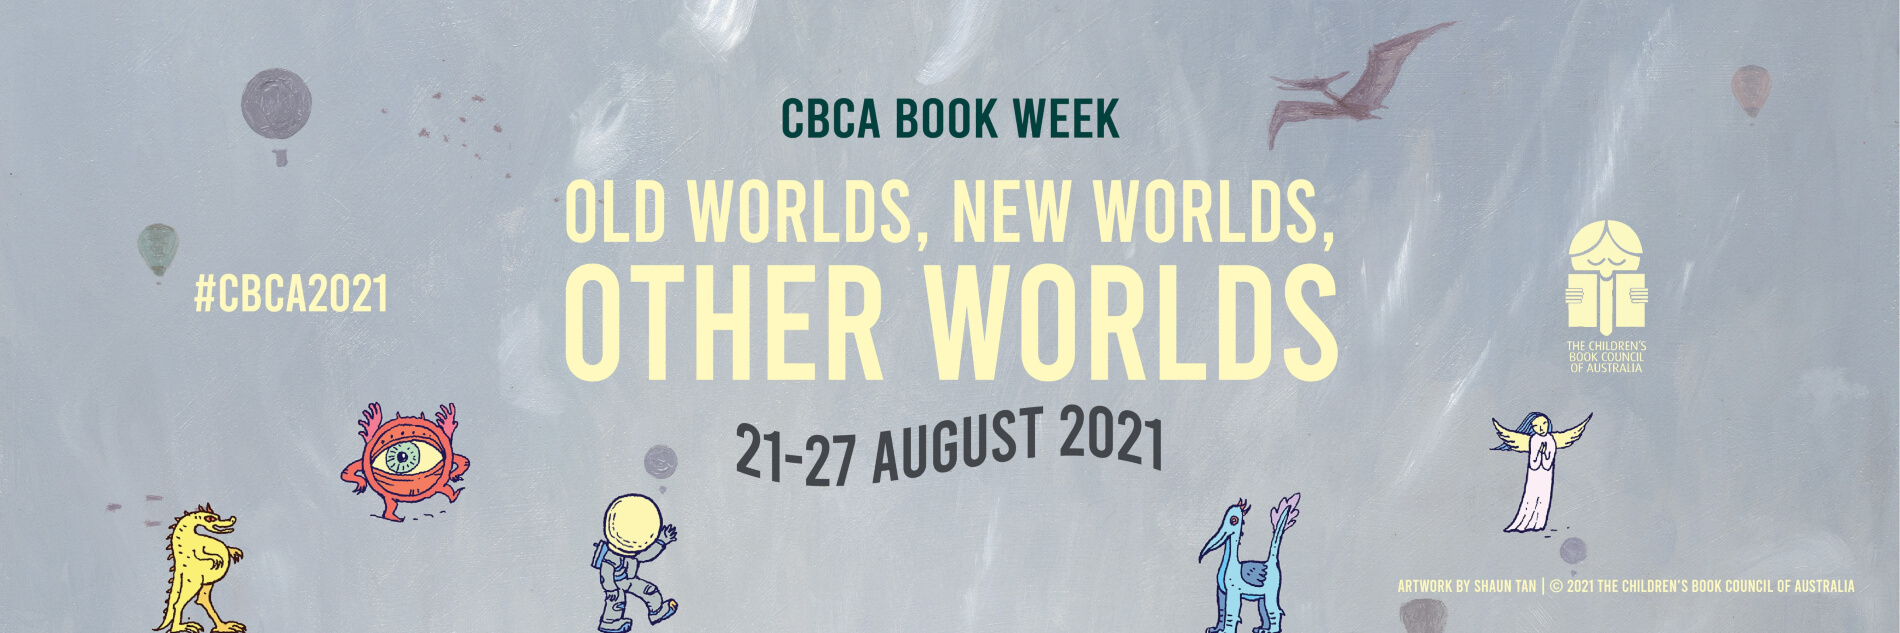 Promotional banner for the CBCA Book Week 2021